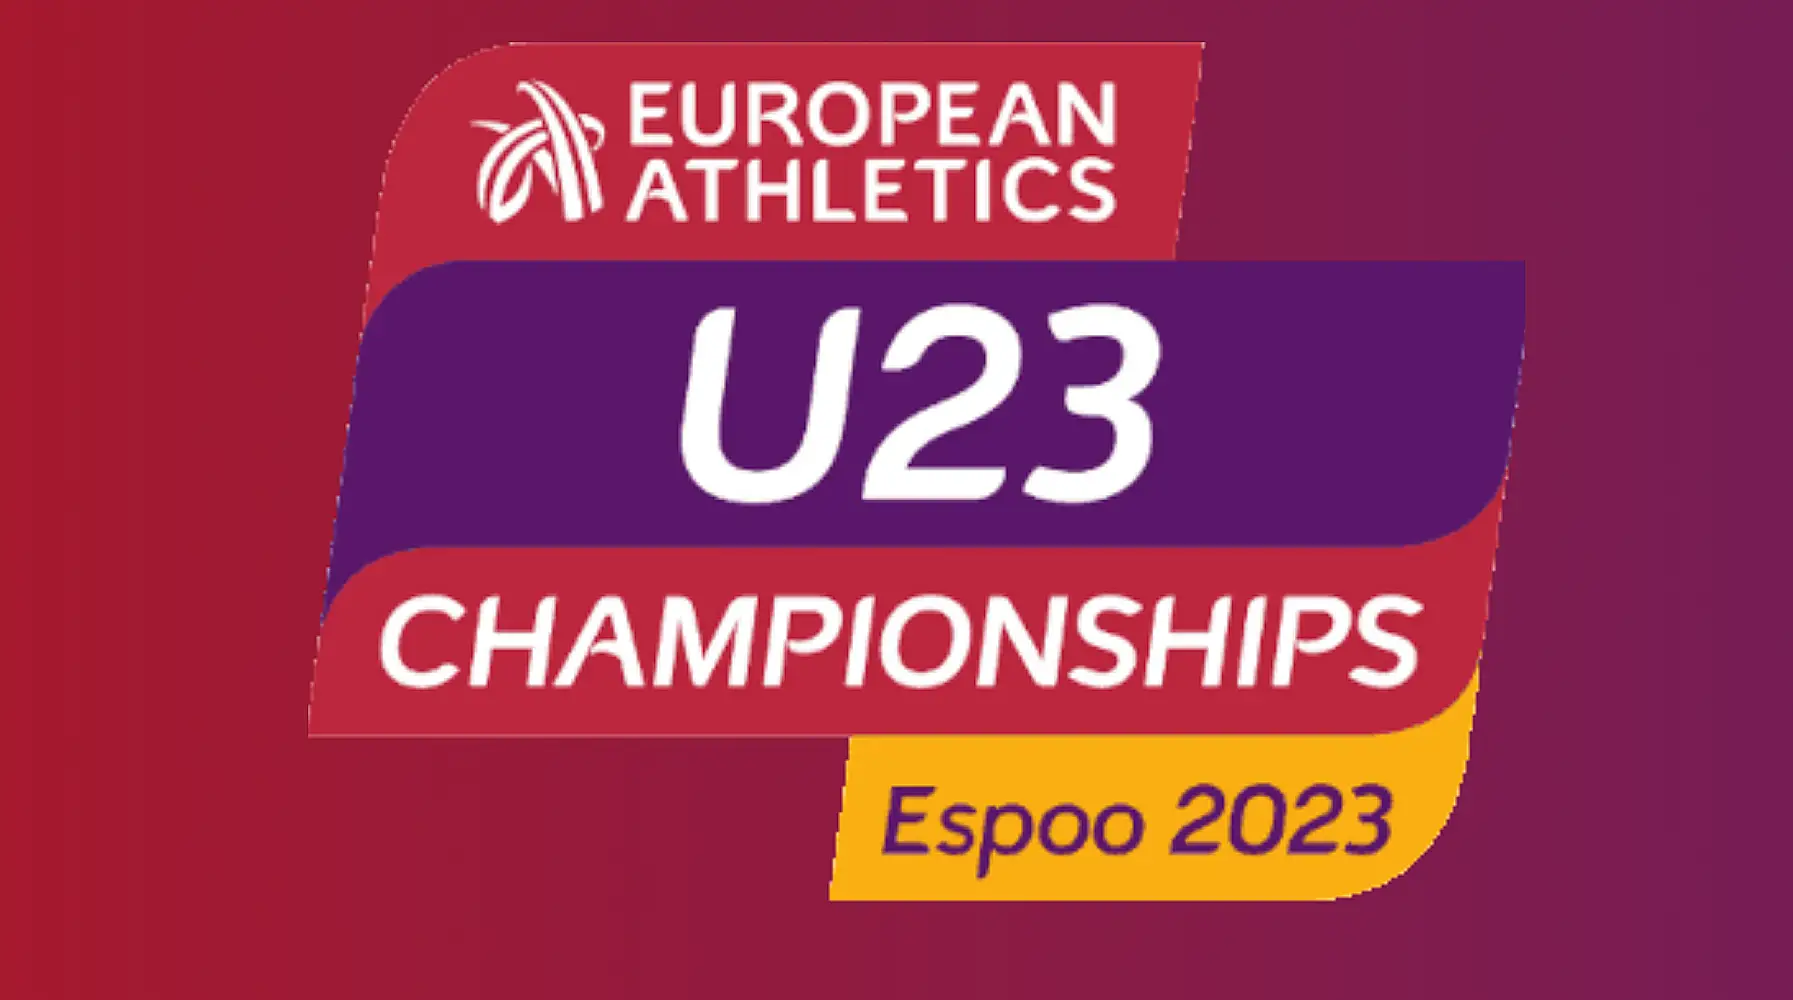 How to watch the European U23 Championships 2023 Live Stream?